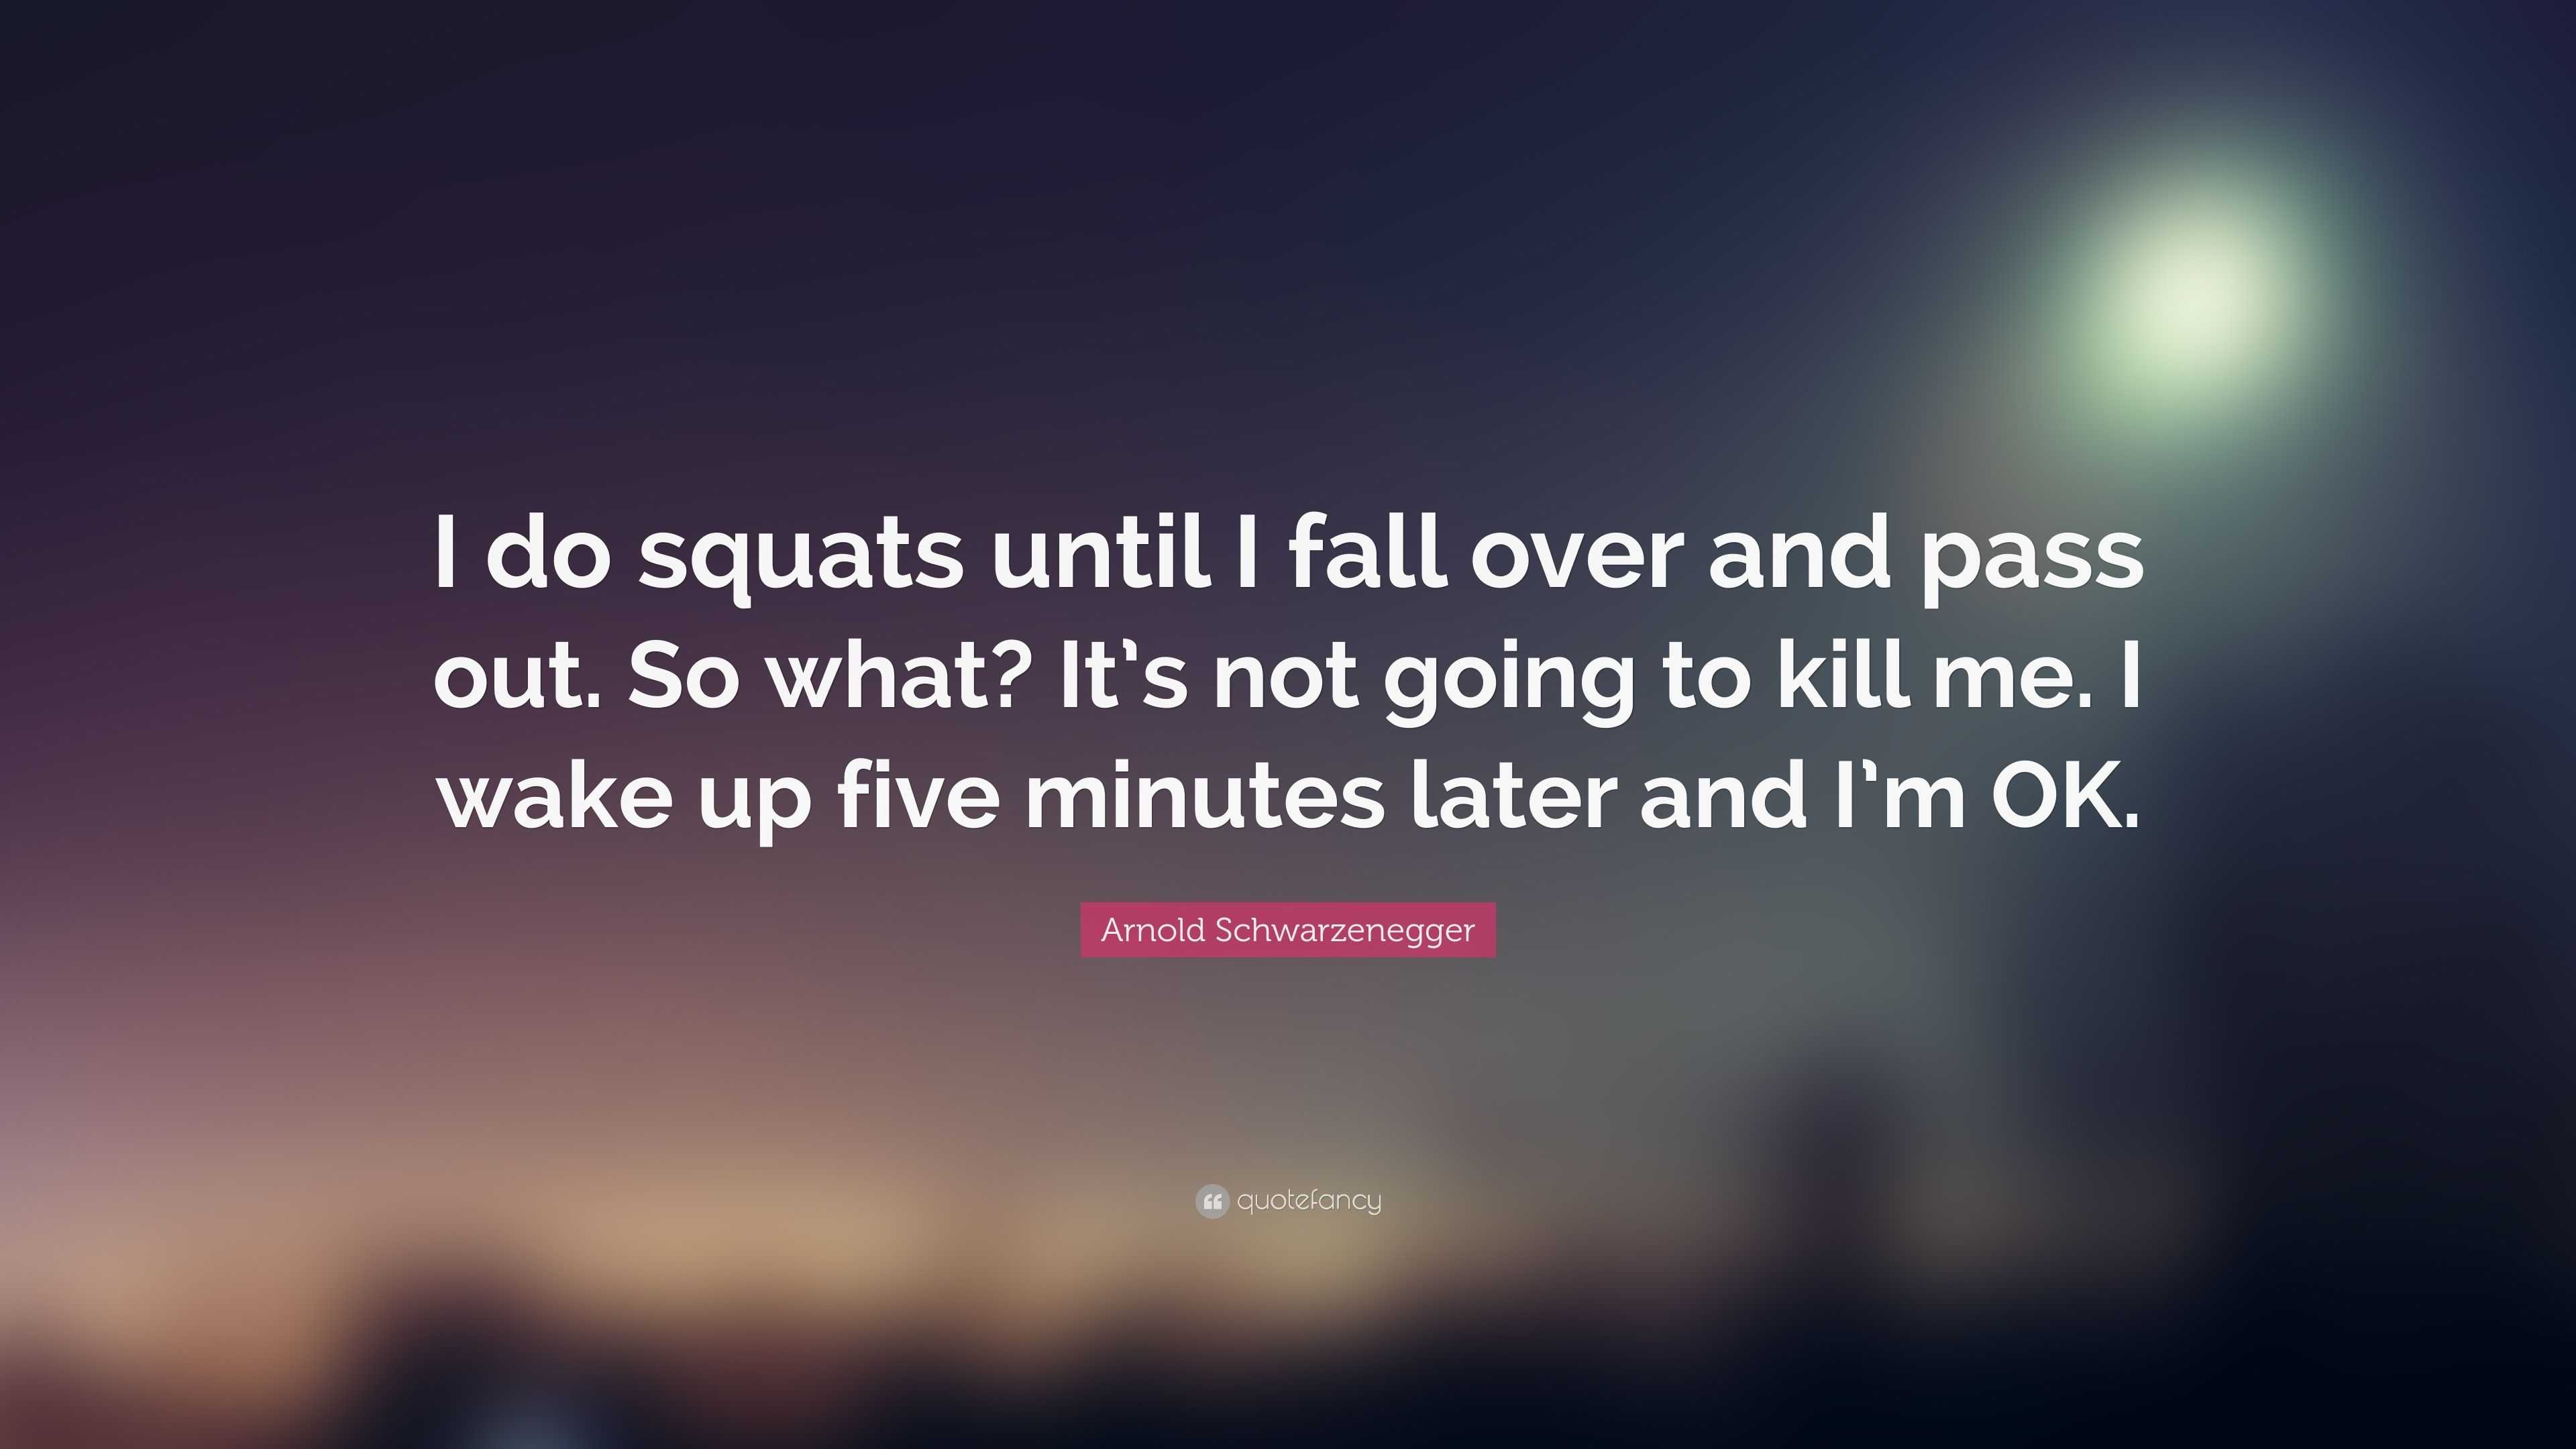 Arnold Schwarzenegger Quote: “I do squats until I fall over and pass out.  So what? It's